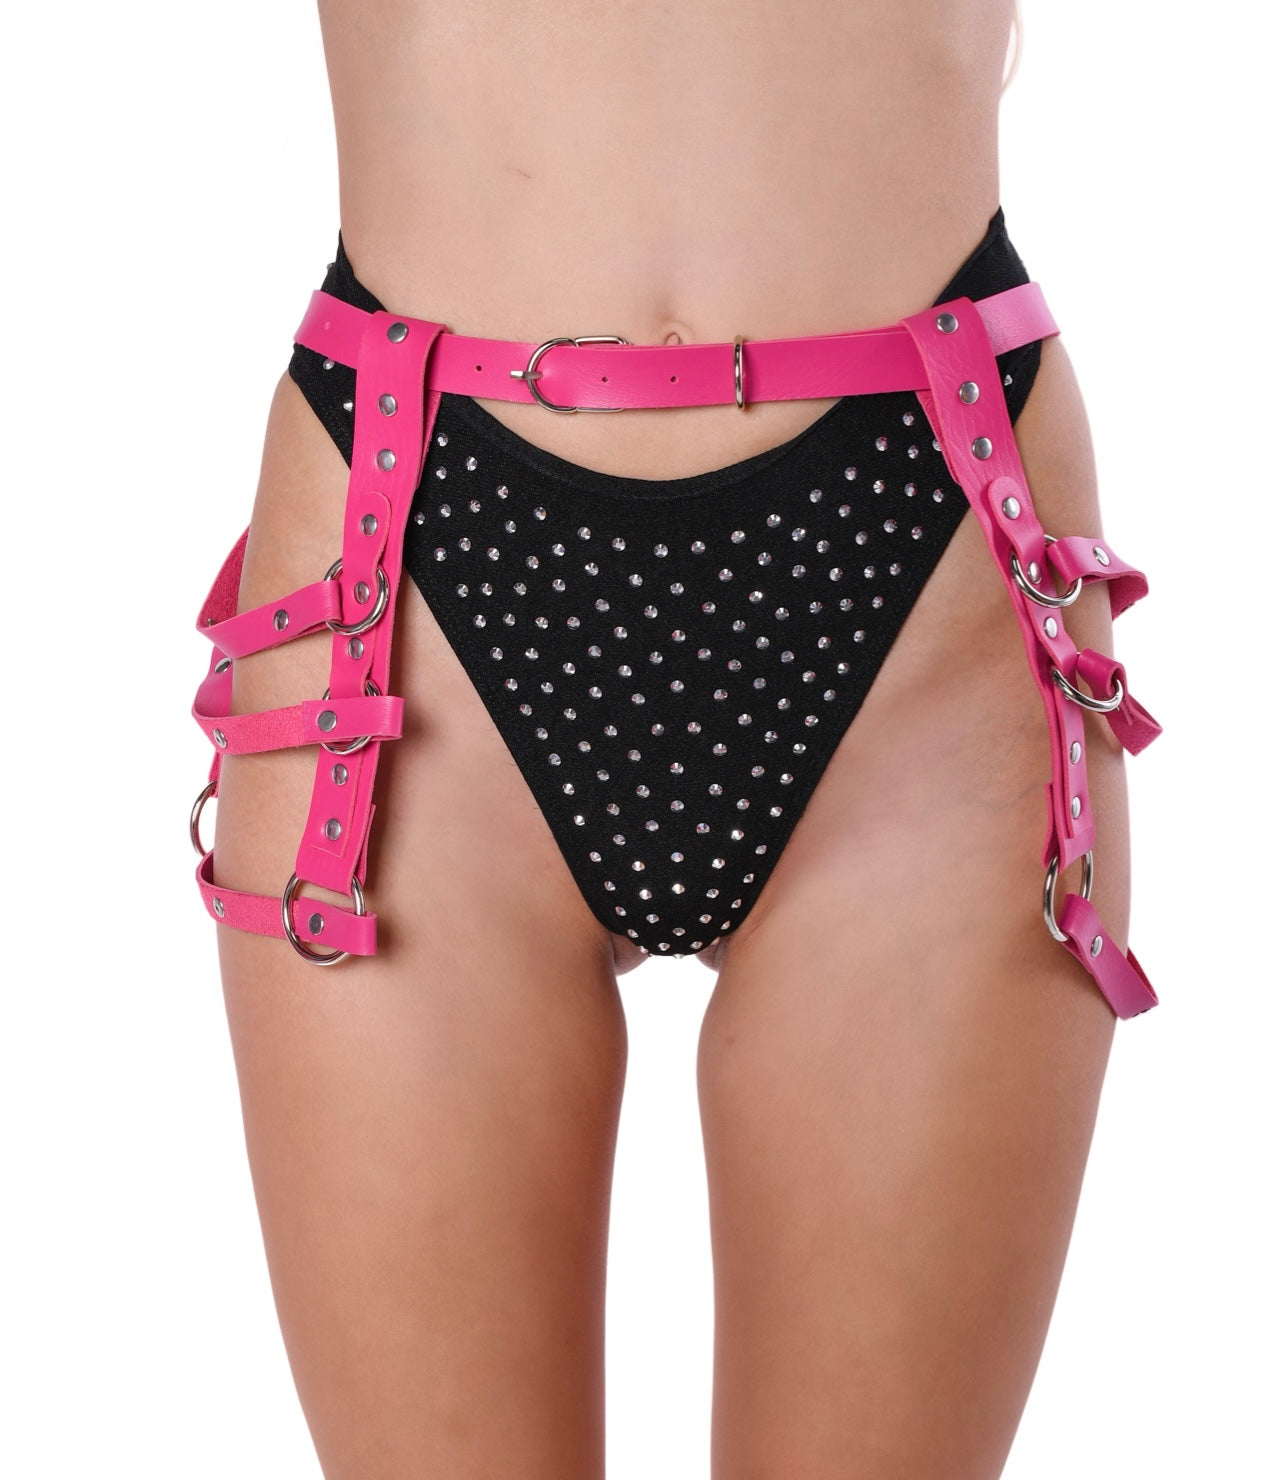 Rose Pink Cage Leg Harness